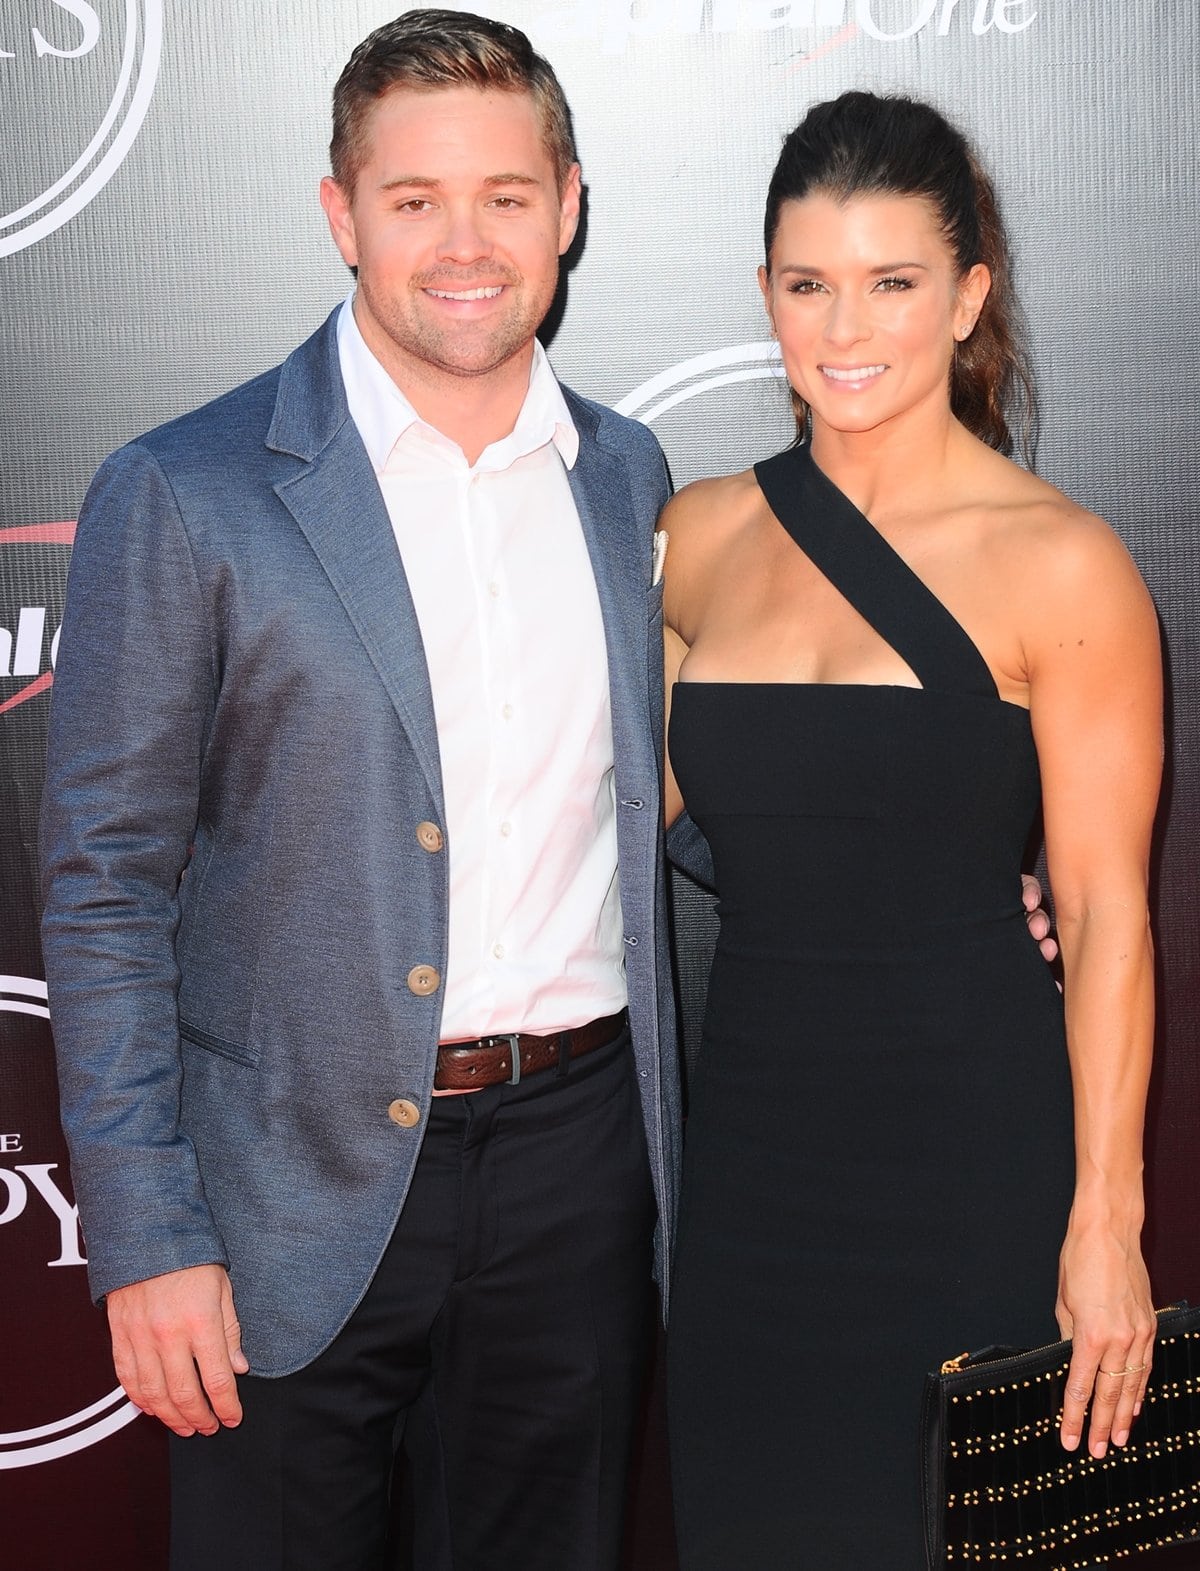 NASCAR drivers Danica Patrick and Ricky Stenhouse Jr. split in late 2017 after five years of dating